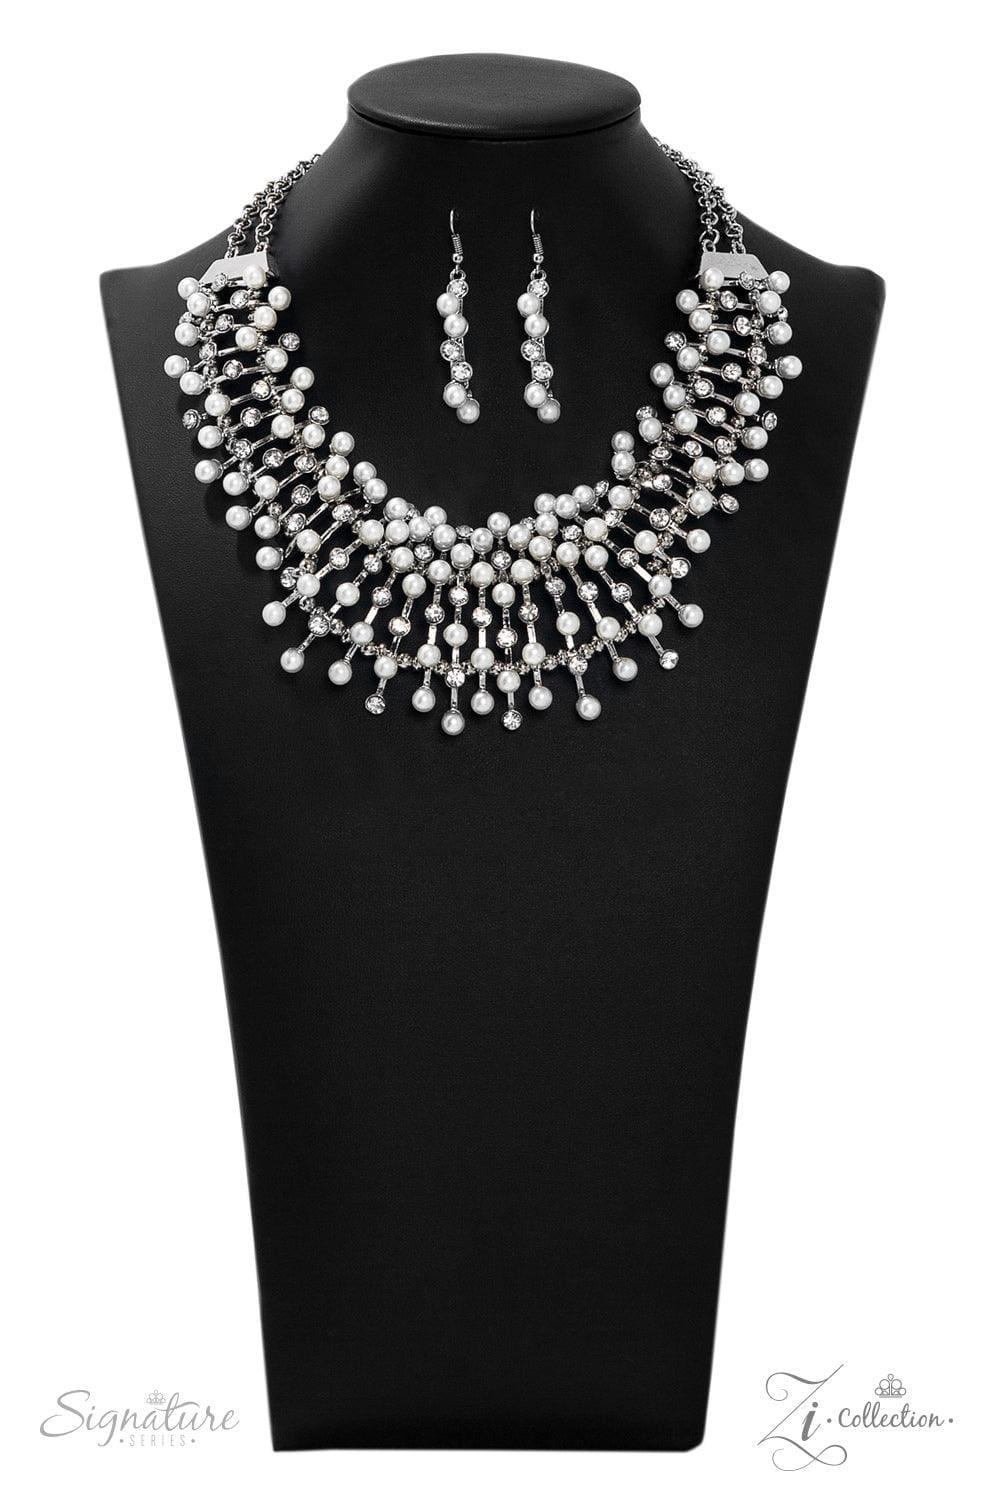 Paparazzi Accessories - The Leanne - 2019 Signature Zi Collection Necklace - Bling by JessieK